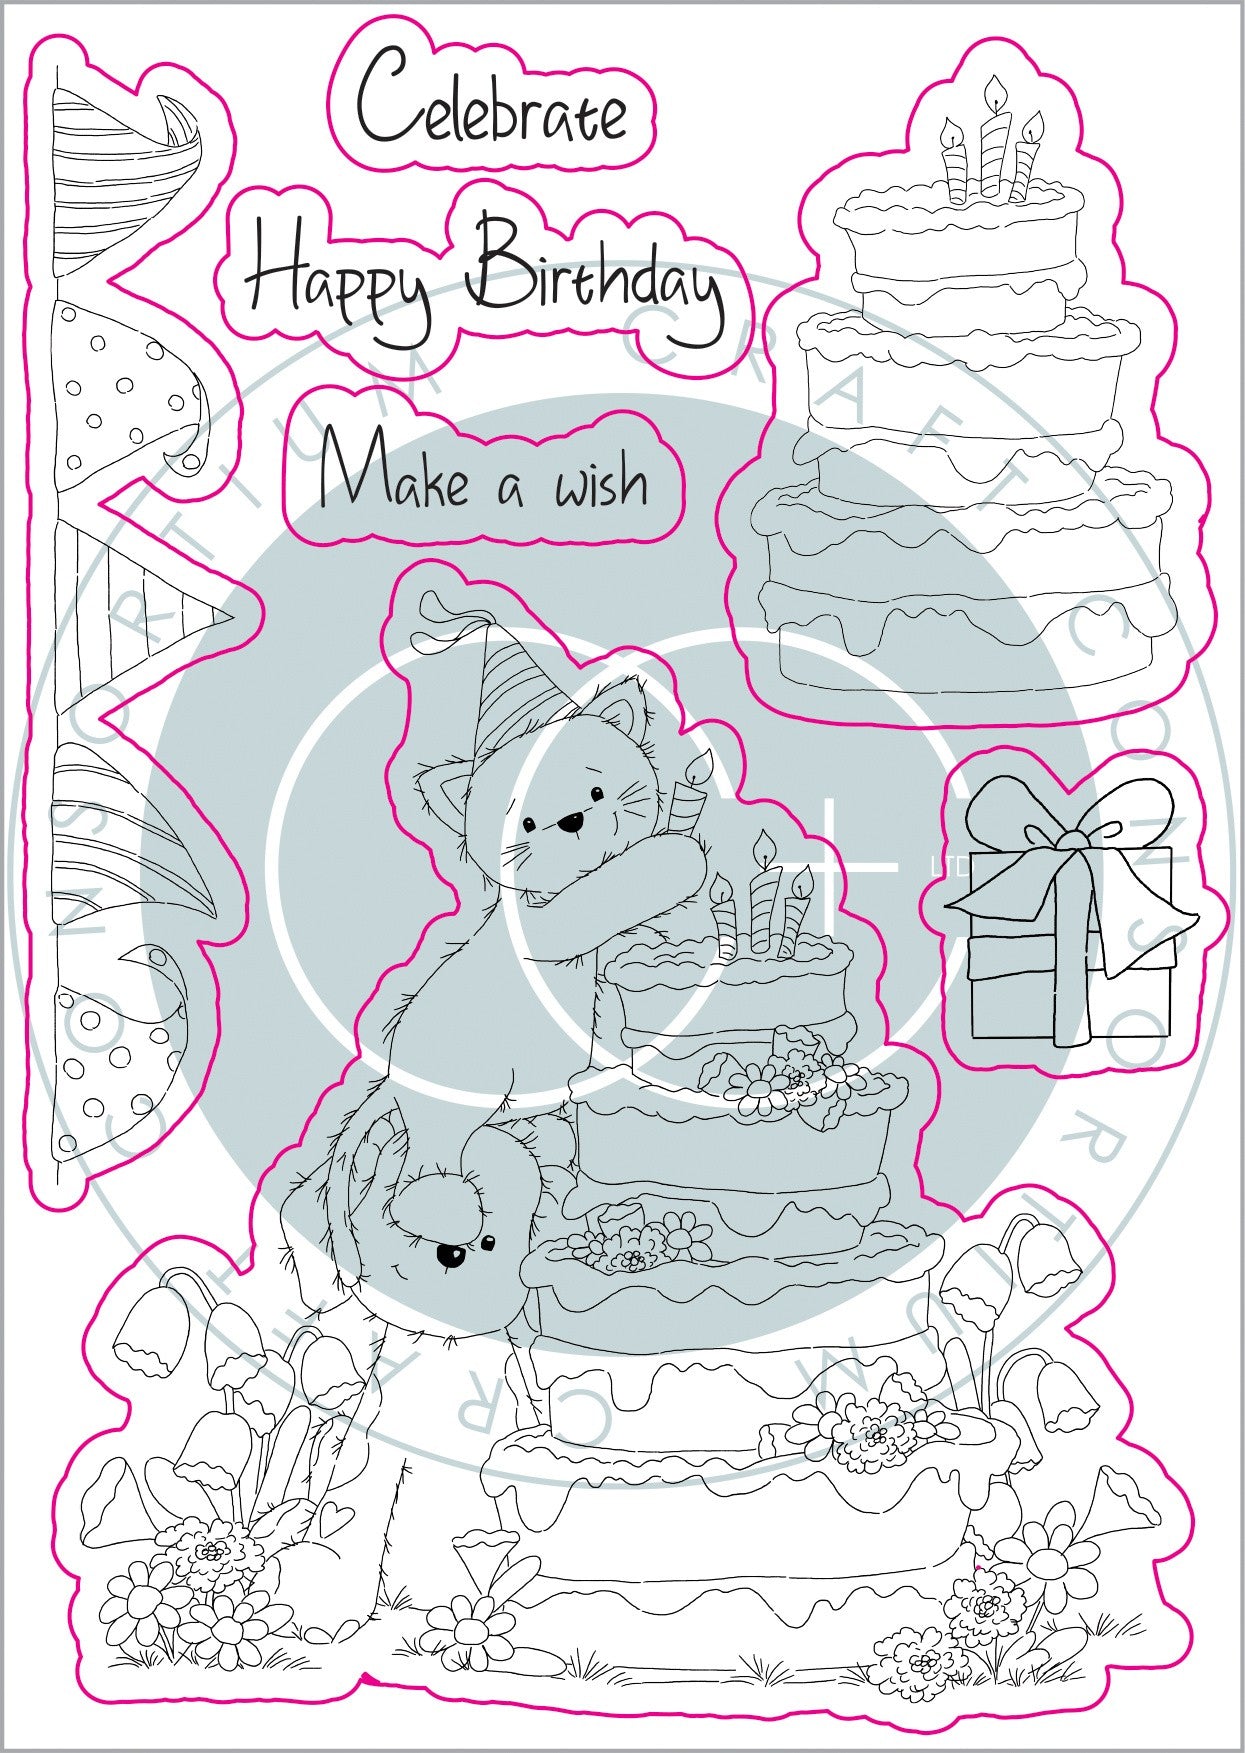 Craft Consortium The Gift of Giving Clear Stamps Make a Wish (CCSTMP039)